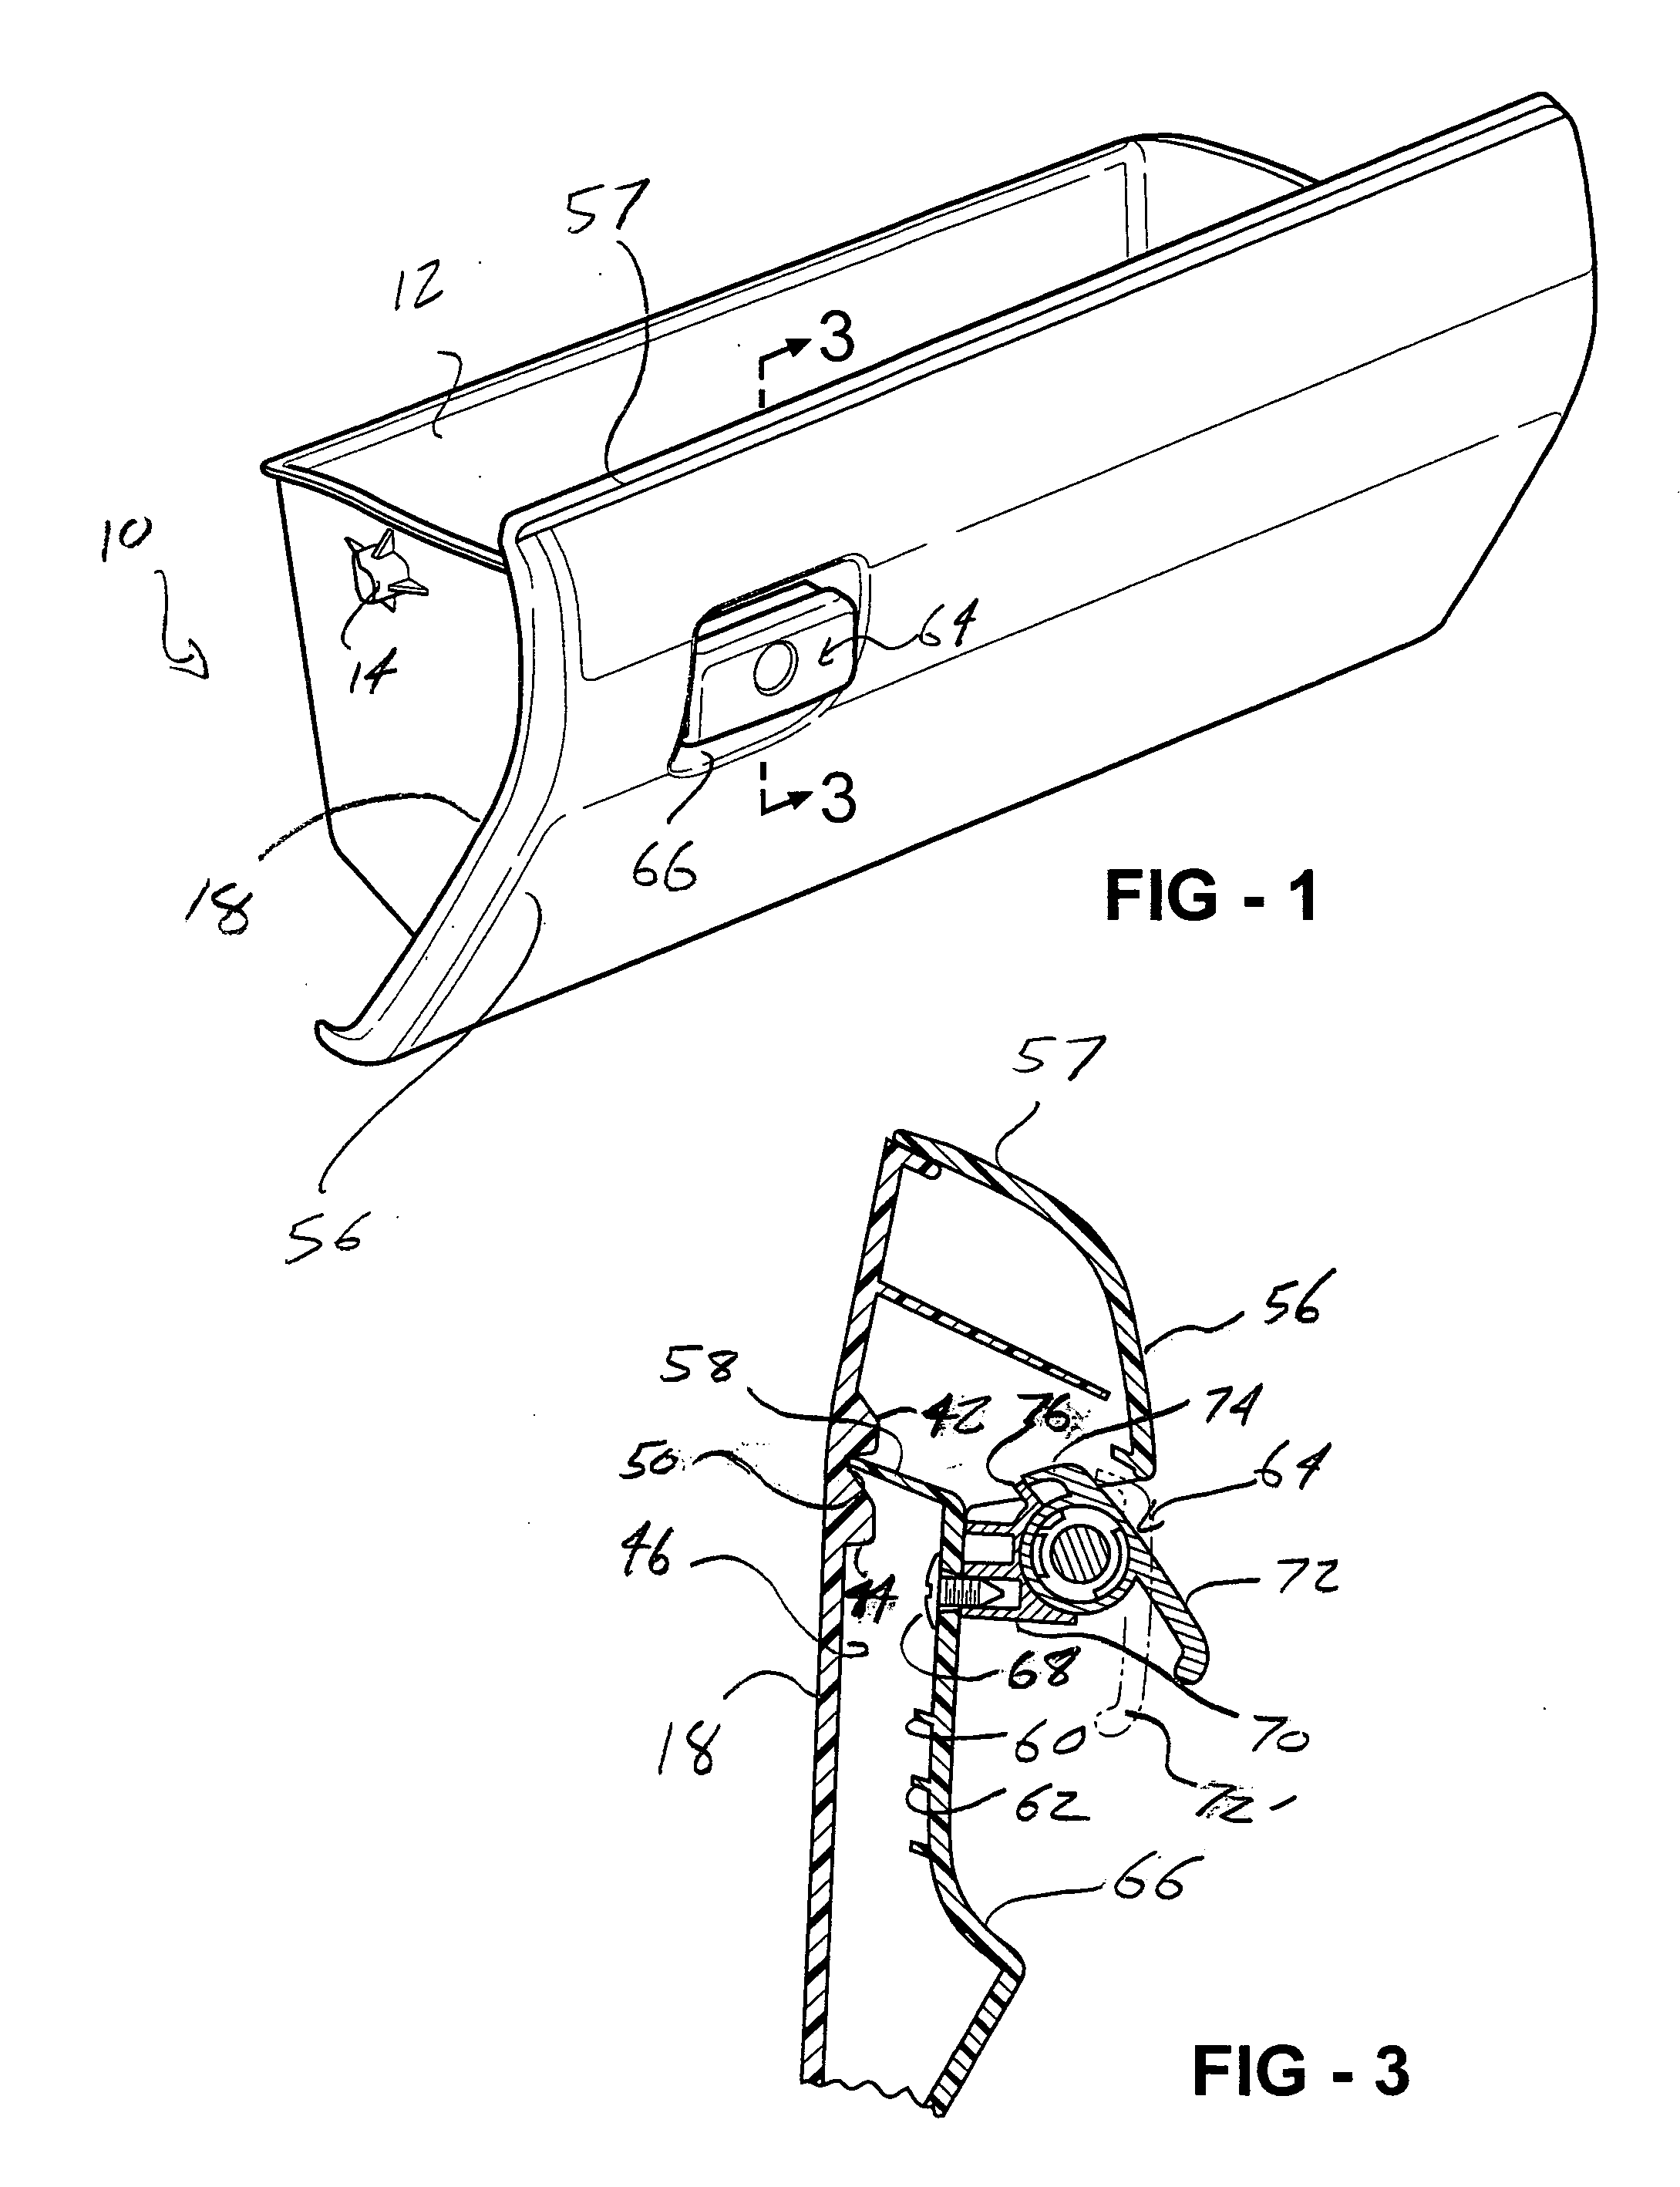 Reinforcing support incorporated into a glove box retaining structure located proximate a pivot actuating handle mechanism